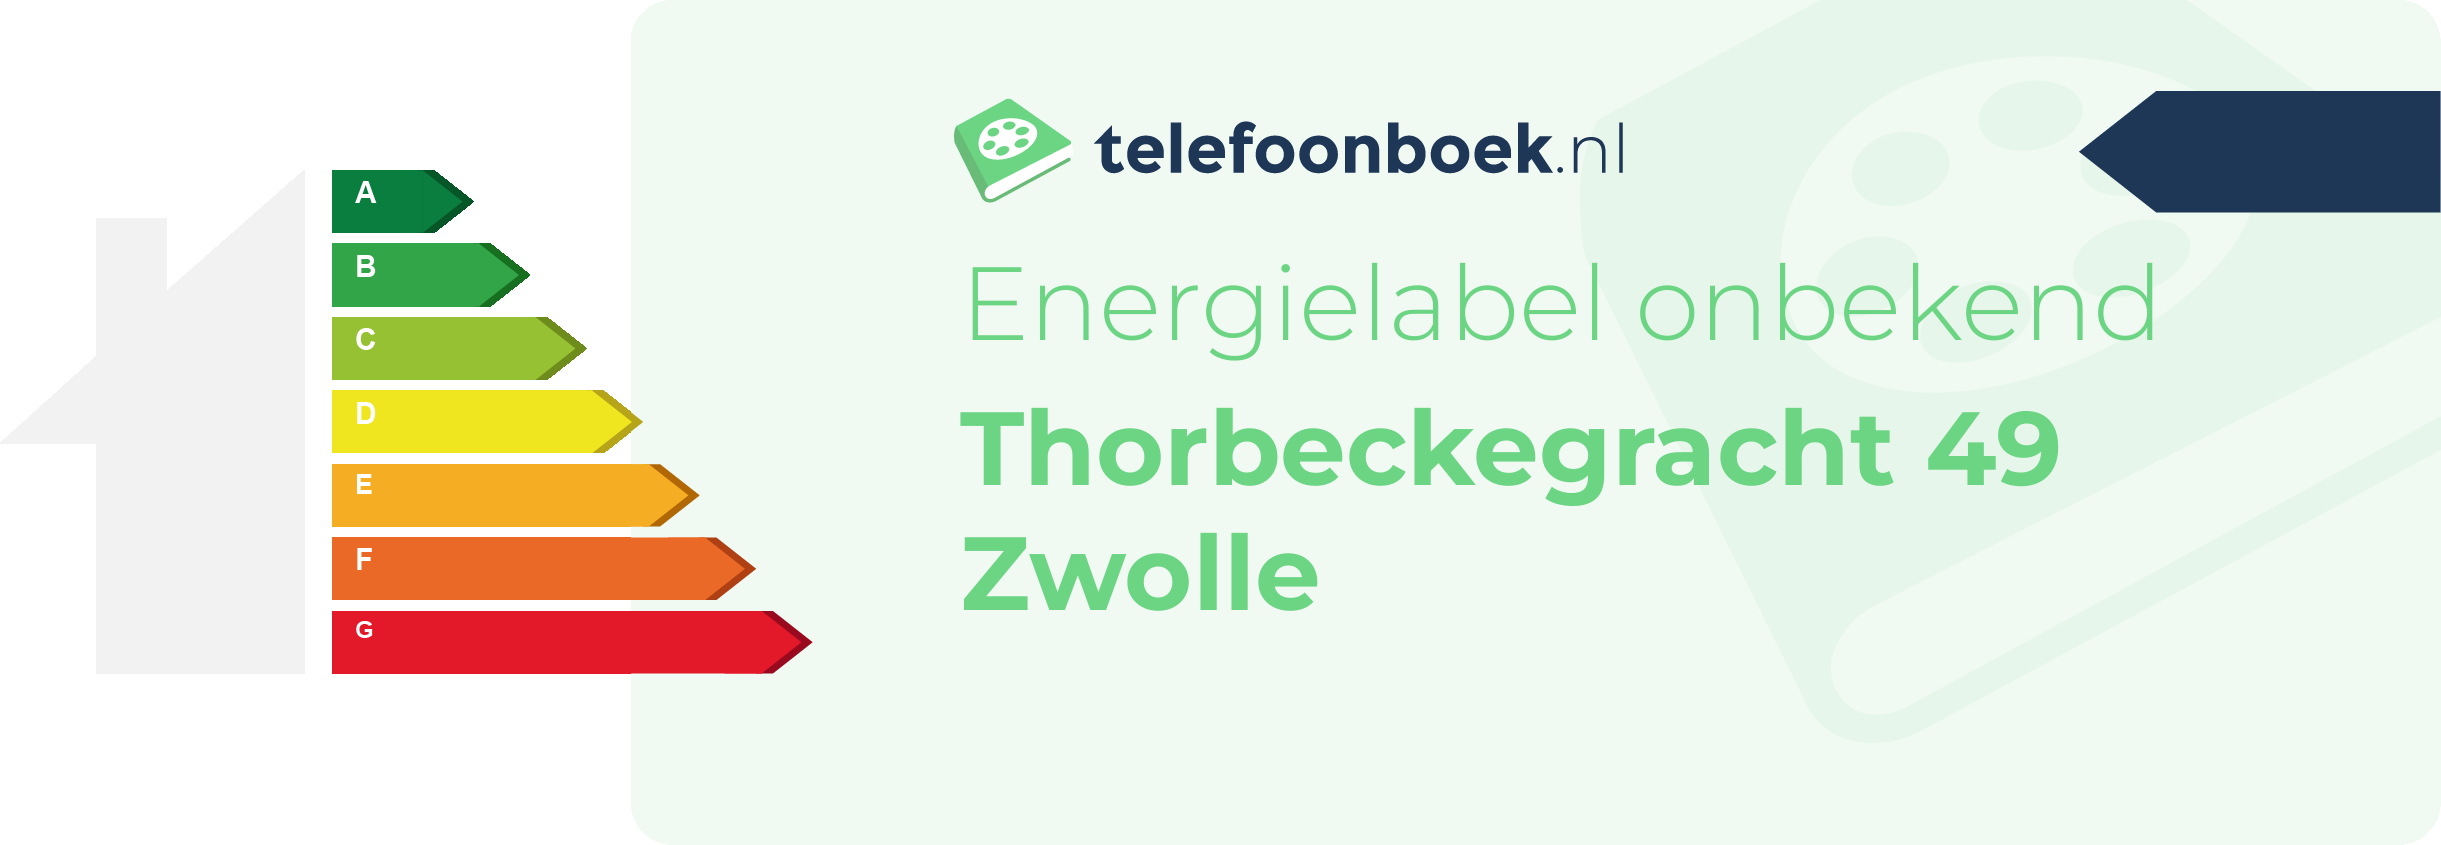 Energielabel Thorbeckegracht 49 Zwolle